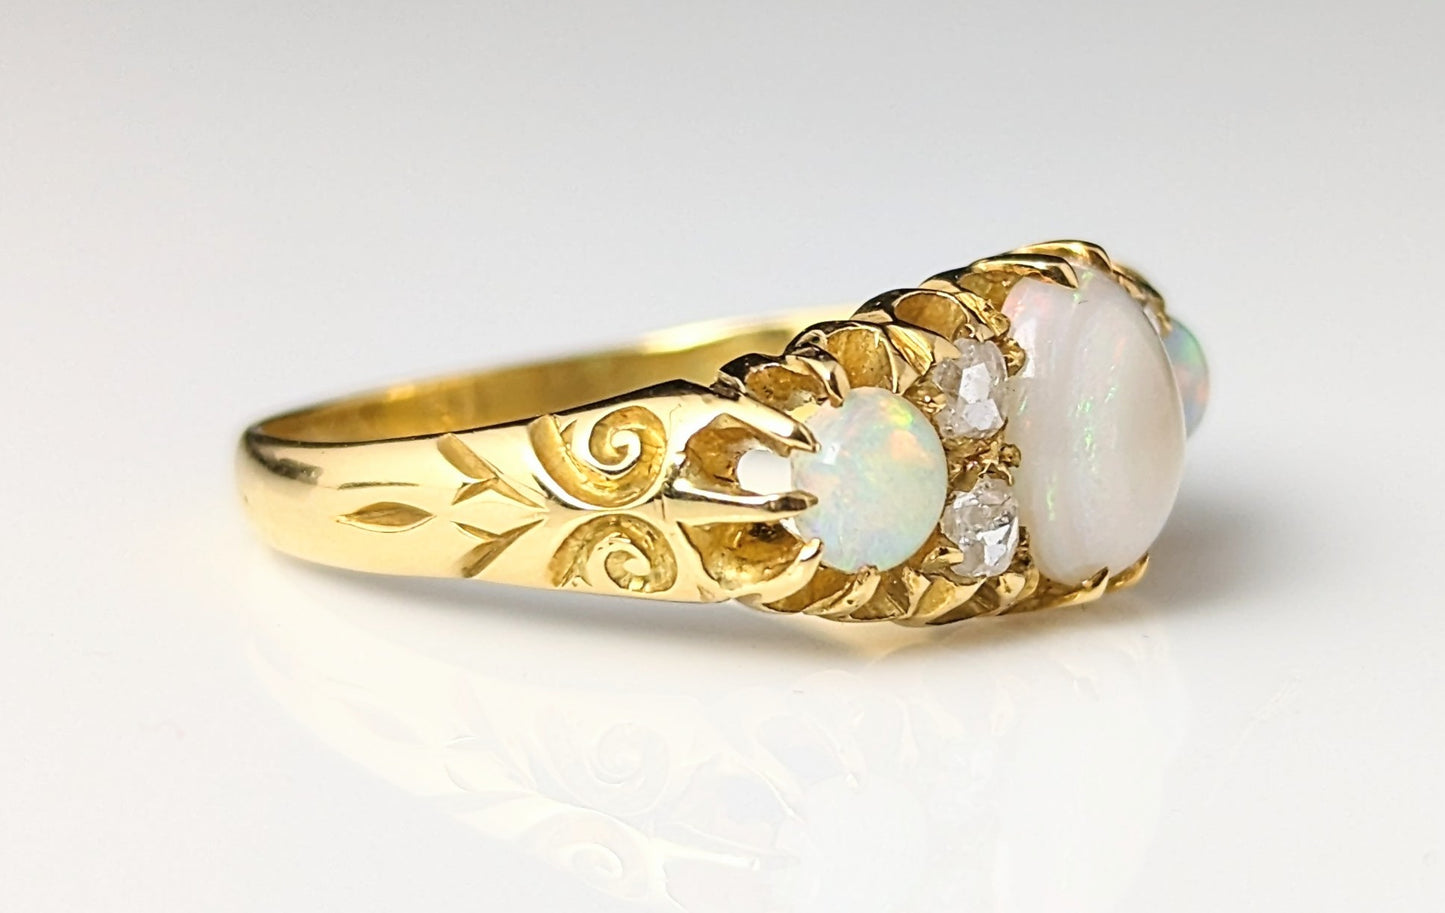 Antique Opal and Diamond ring, 18ct yellow gold, Edwardian